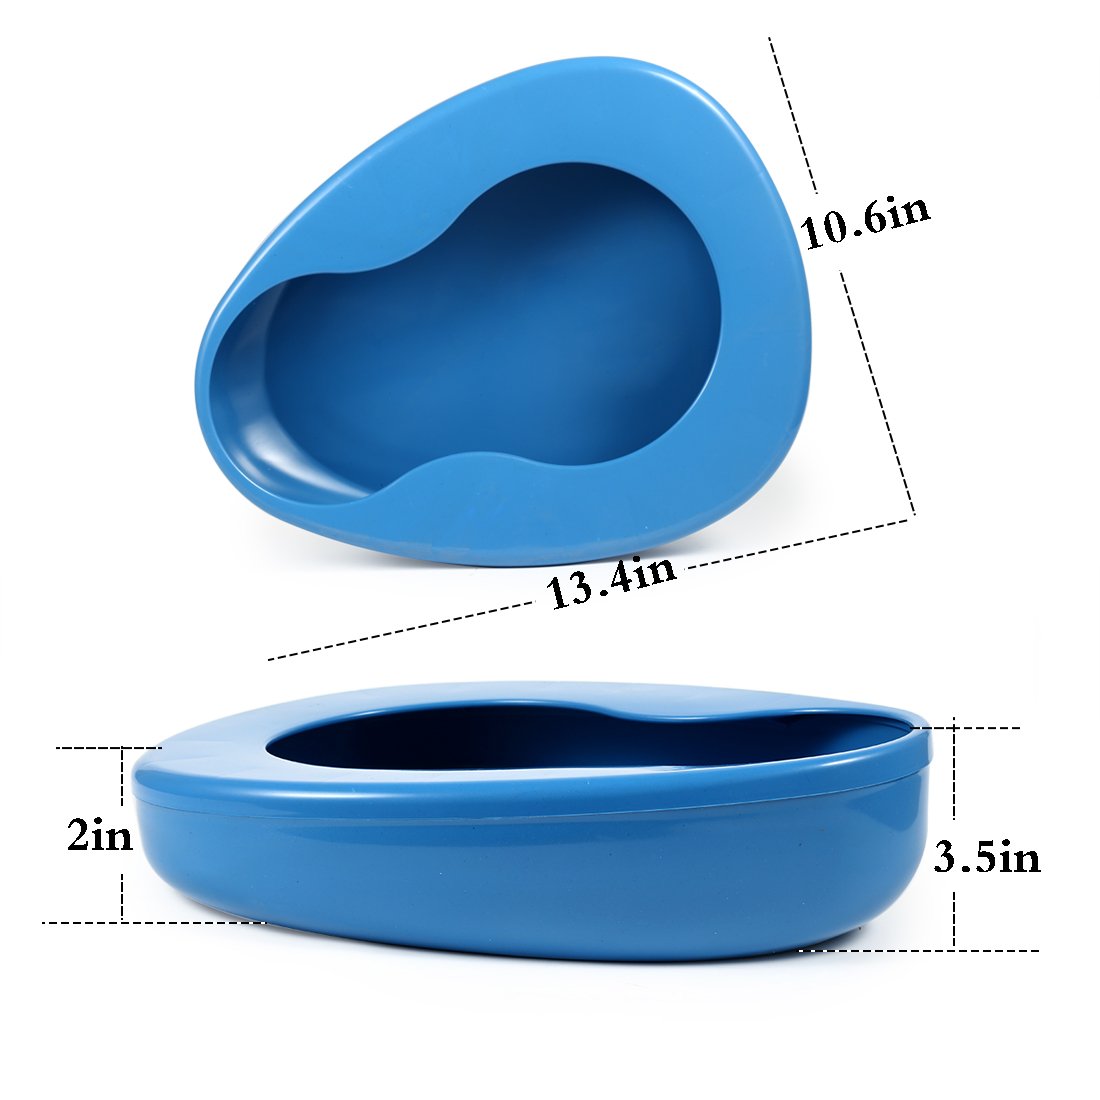 ONEDONE Bedpan for Elderly Females Heavy Duty Bed Pans for Elderly Men Women Thick Large Bedpans for Bedridden Patient Hospital Home Bed Pan Emergency Device (Blue)